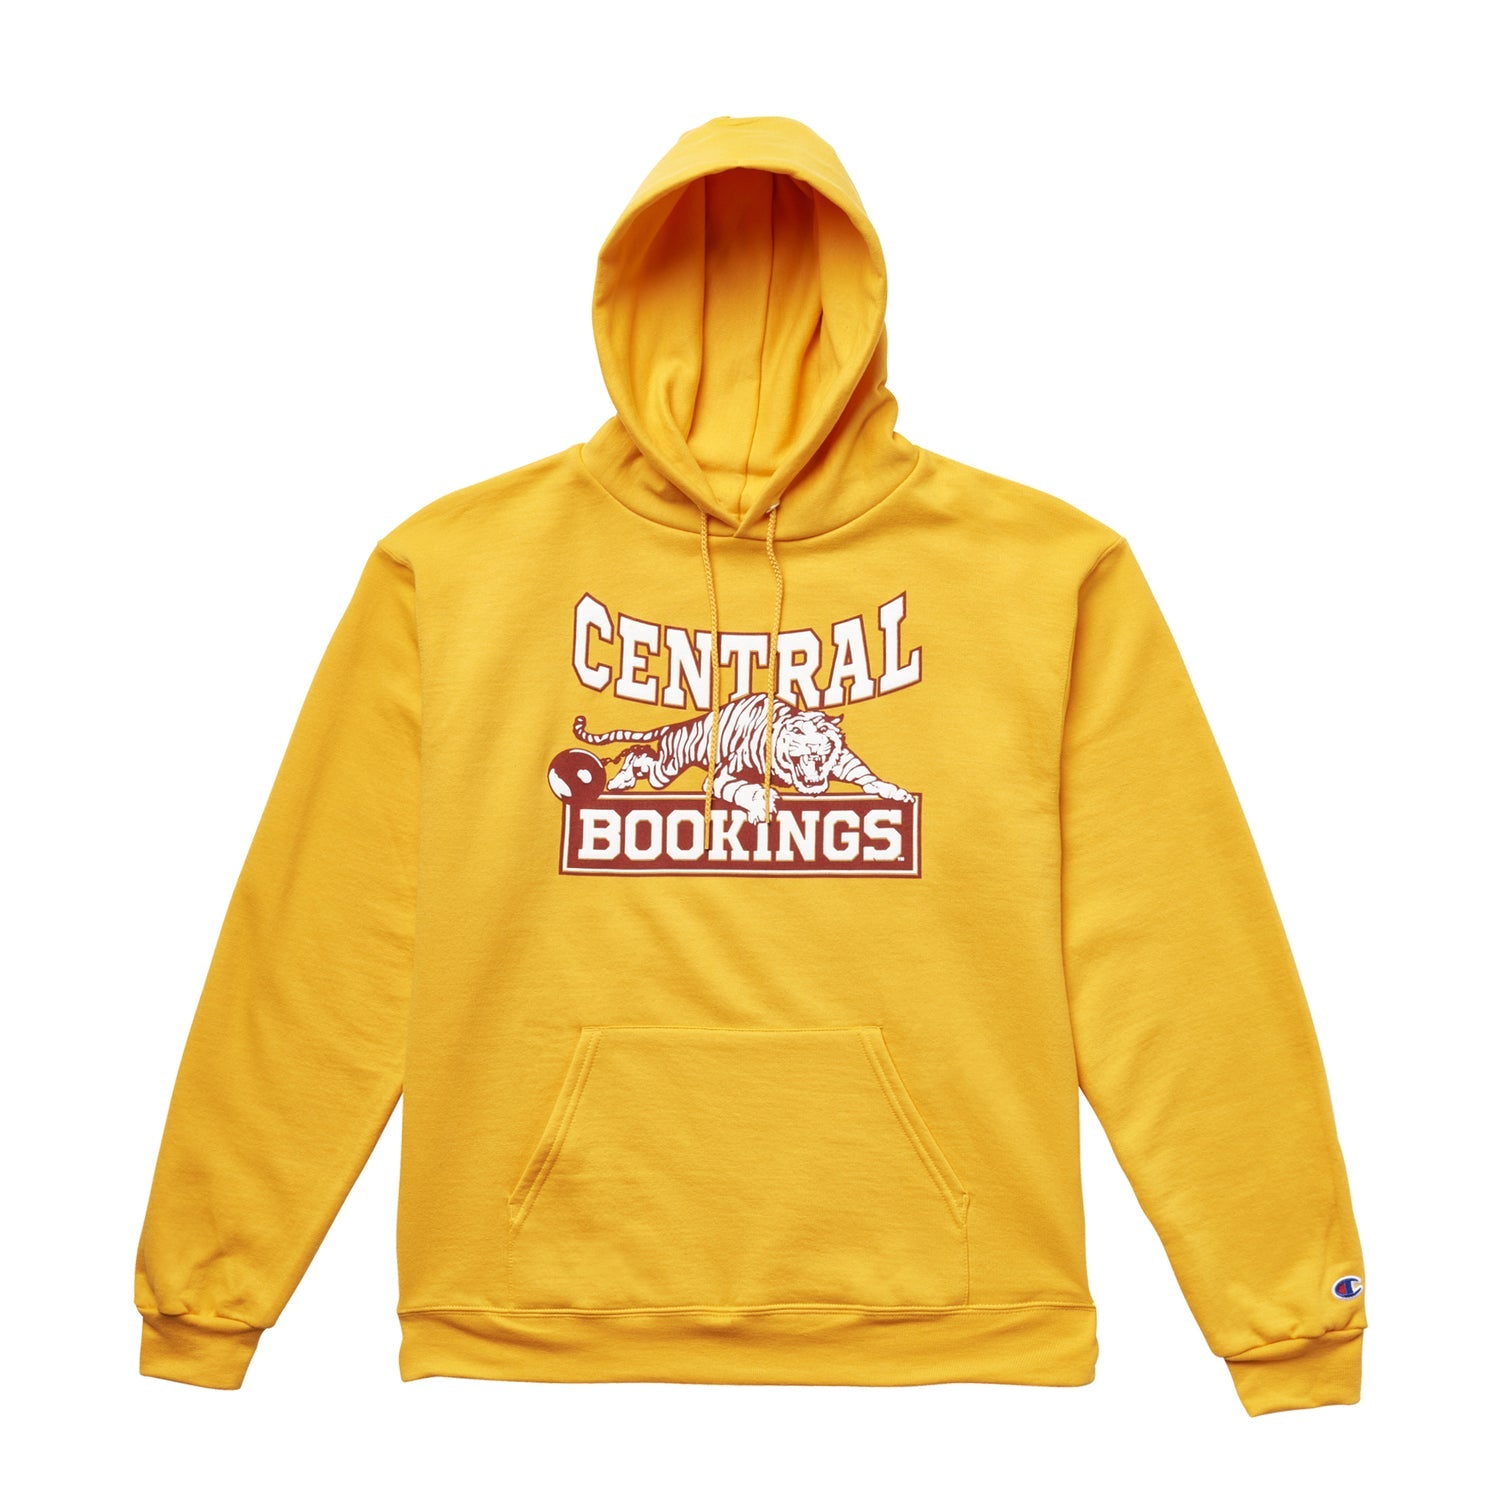 Jr. High Pullover, Yellow